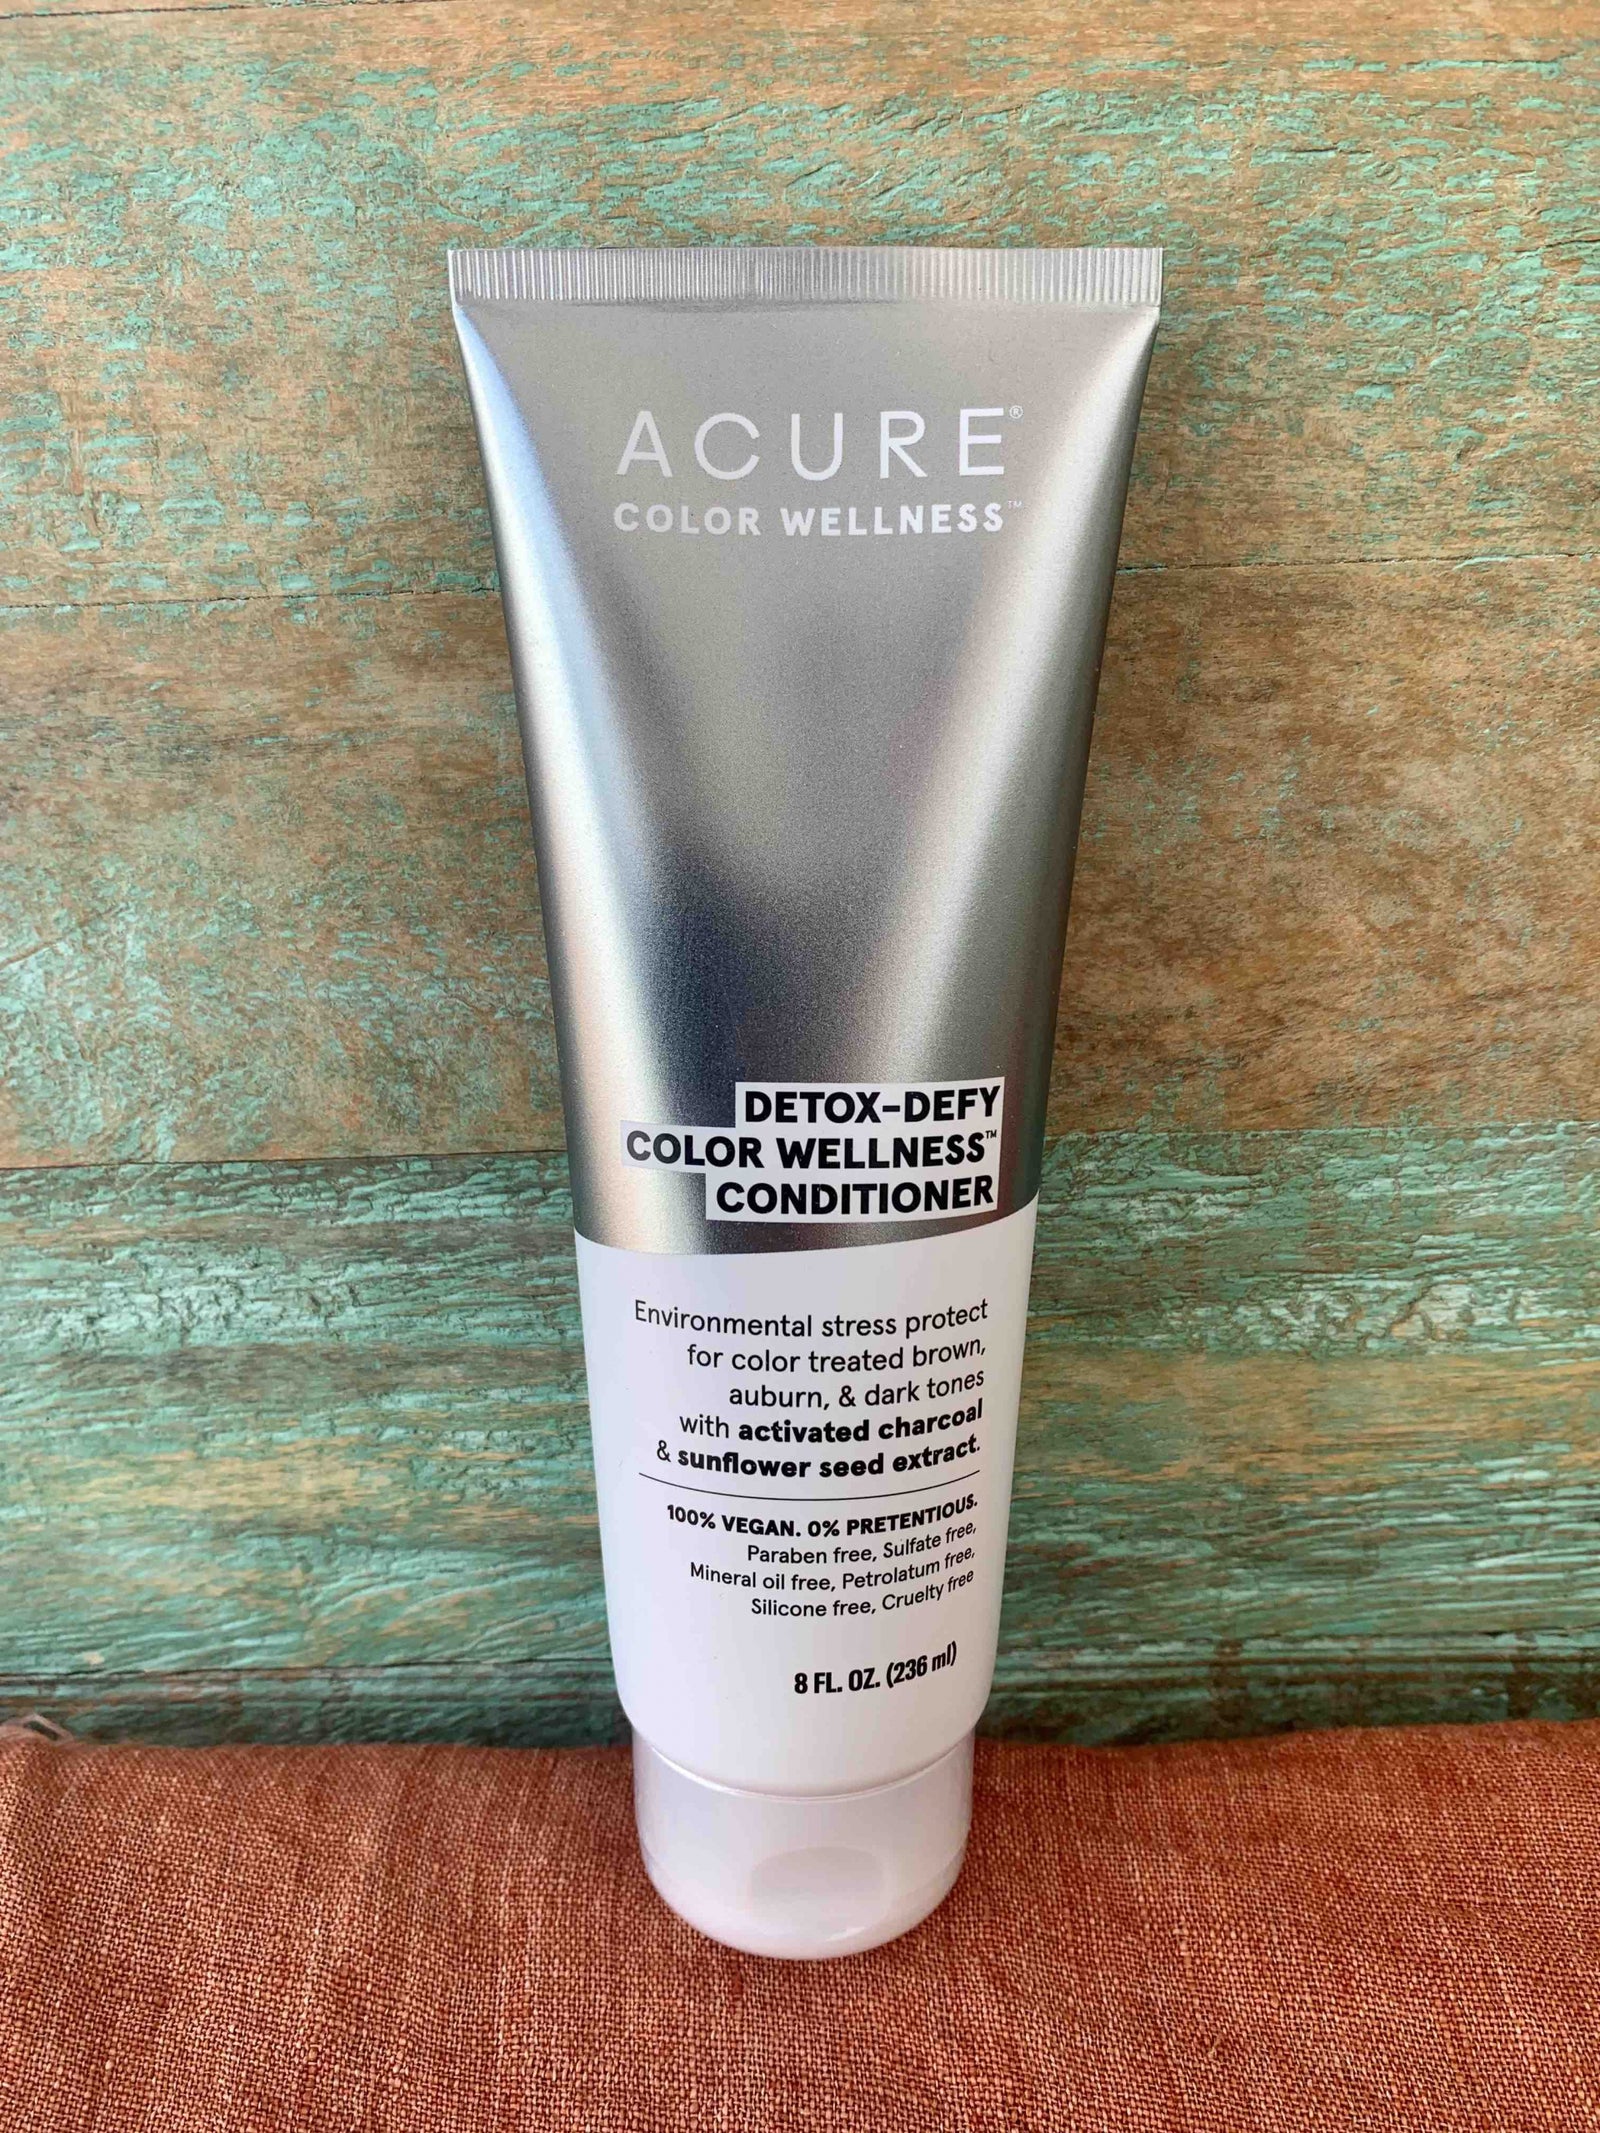 Acure Conditioner - Detox-Defy Color Wellness